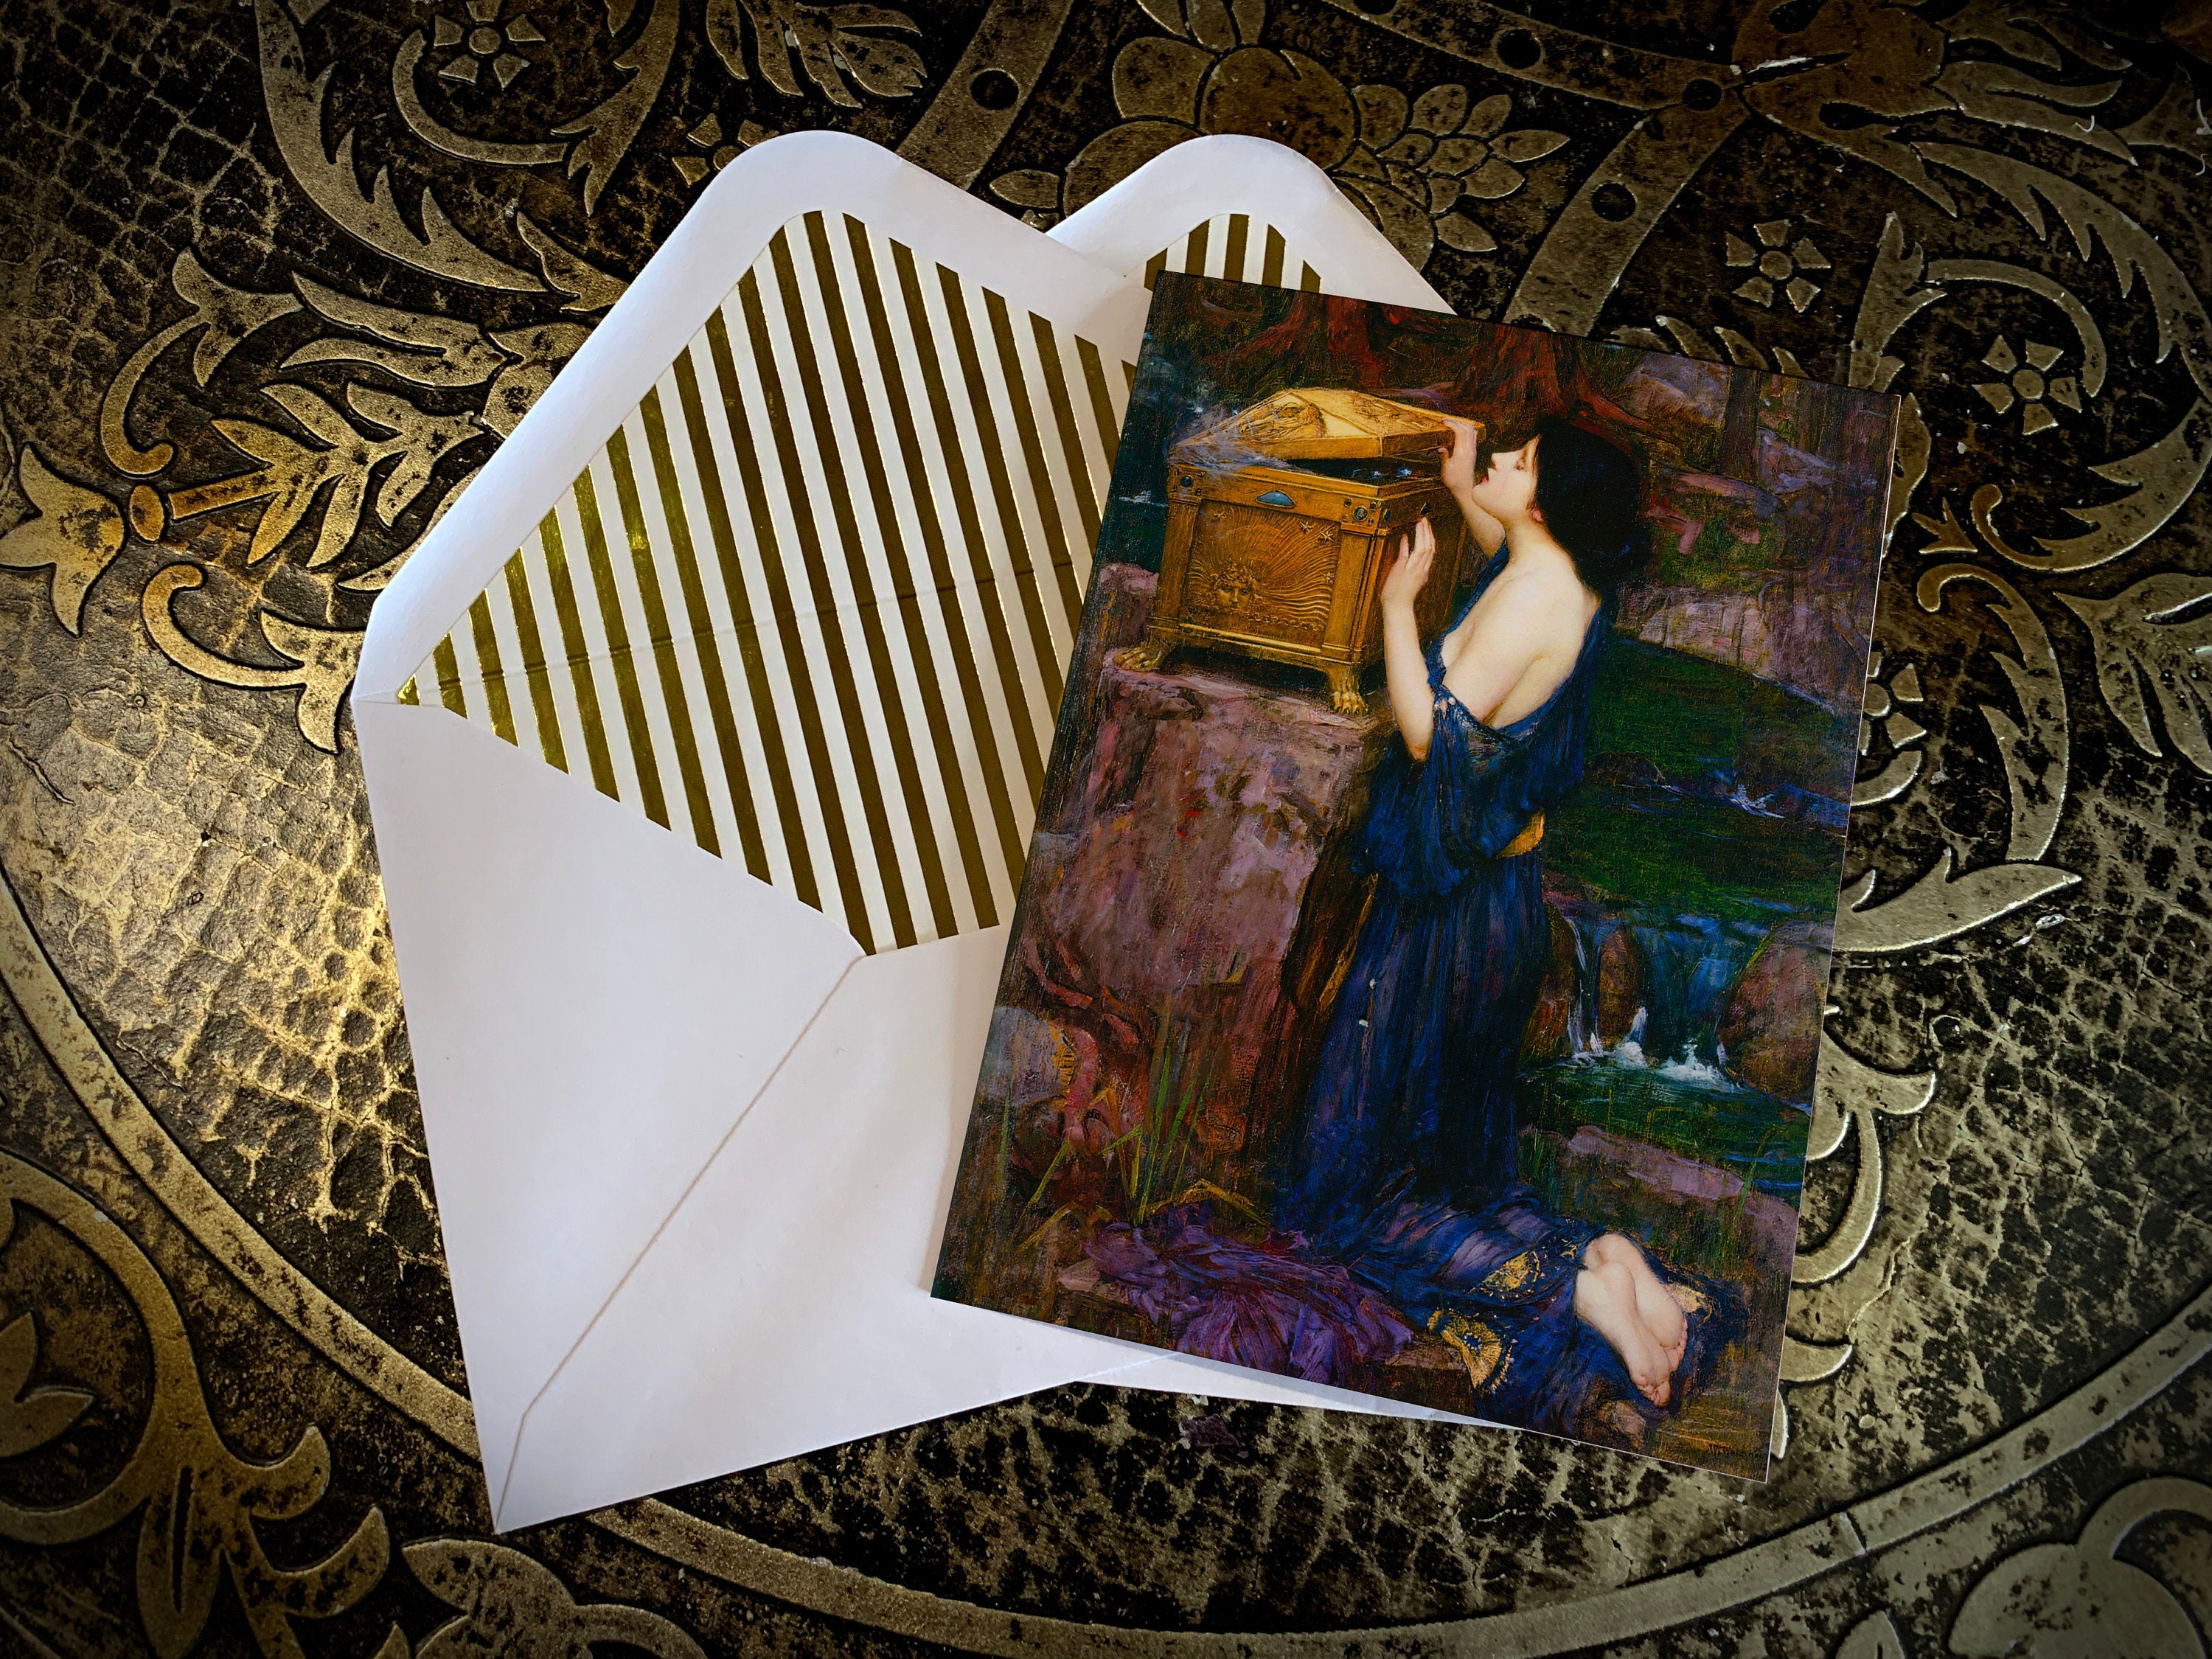 Damsels by John William Waterhouse, Everyday Greeting Cards with Elegant Striped Gold Foil Envelopes, 5in x 7in, 5 Cards/5 Envelopes